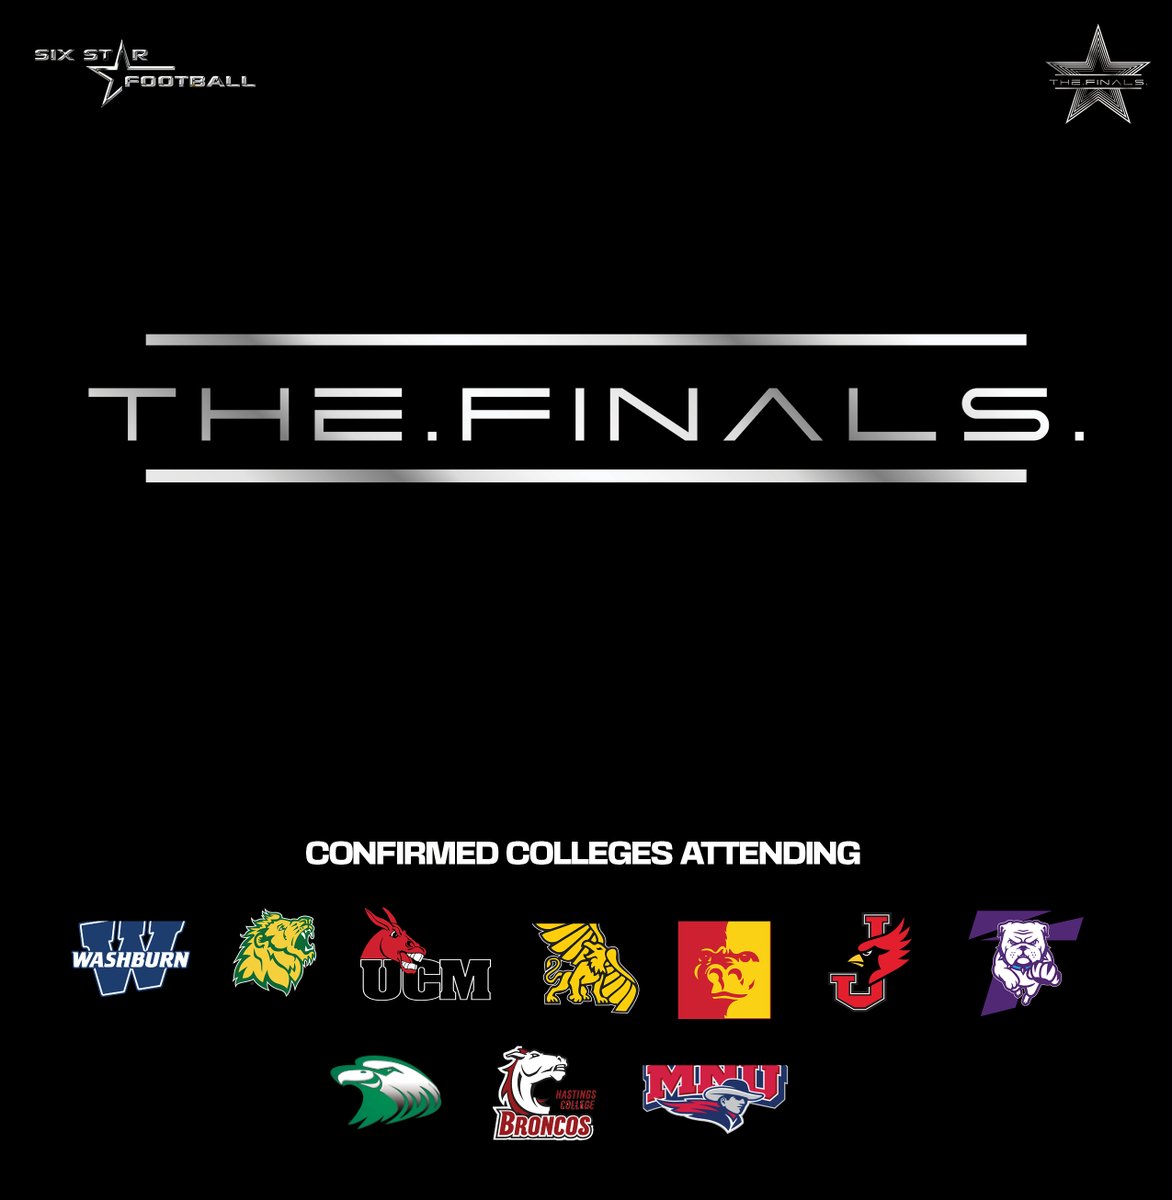 Six Star Football I TheFINALS COMMITTED COLLEGES Central Missouri, Missouri Southern, Missouri Western, Pittsburg State, Truman, Washburn, William Jewell, Central Methodist, Hastings (Neb), Mid America Nazarene TheFINALS 2024 ⭐When: May 25 ⭐Where: Ray-Pec ⭐Time: 12-5 PM